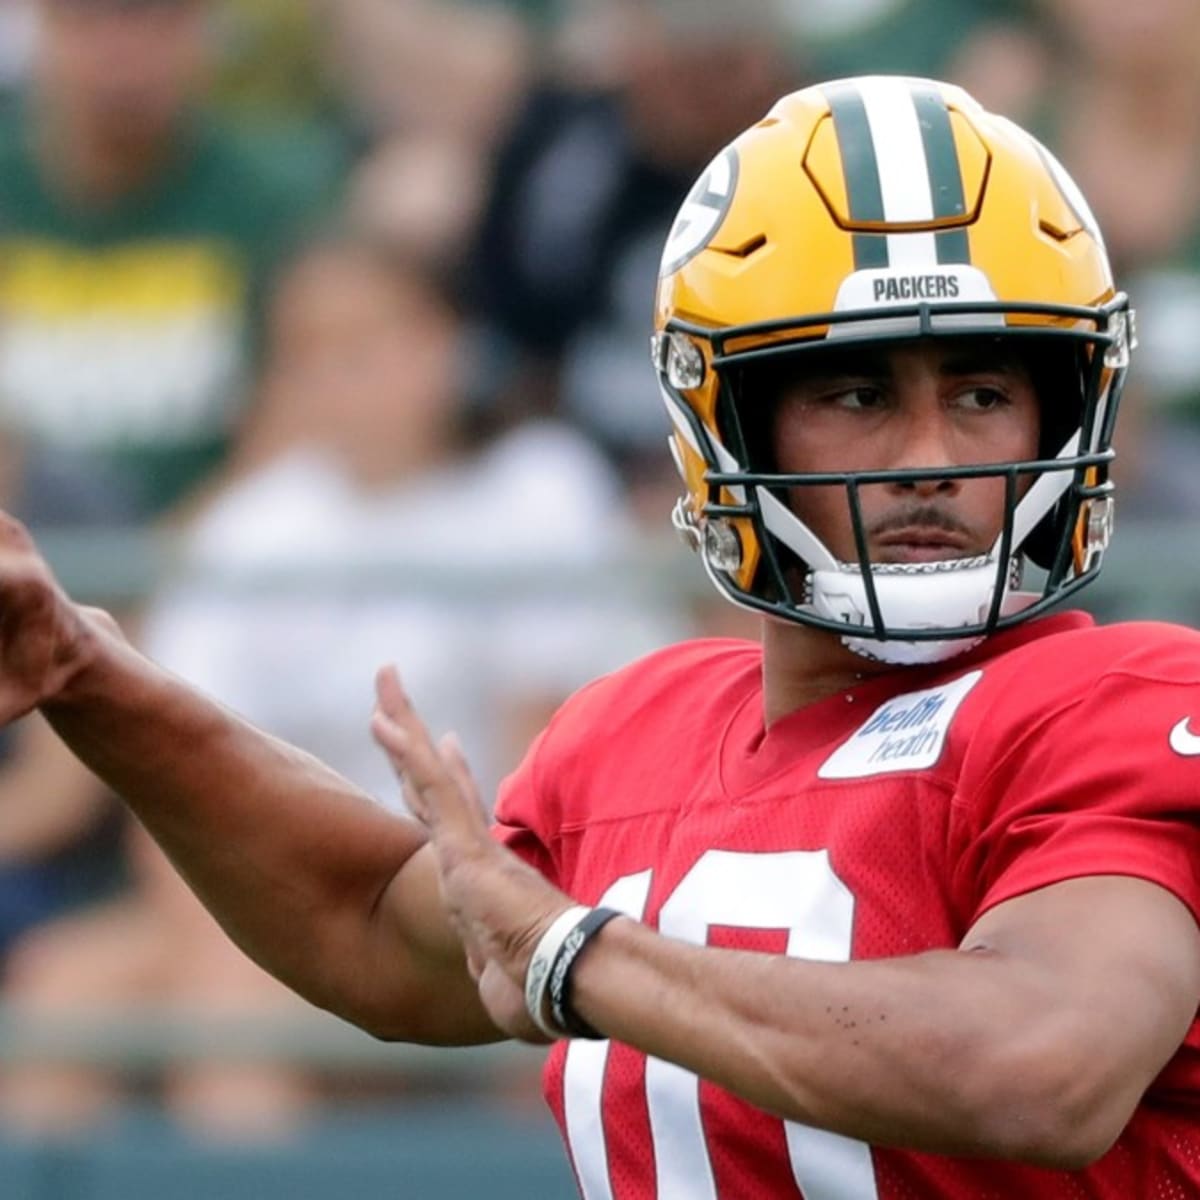 Packers vs. Texans, Preseason 2021: Game updates & live discussion - Acme  Packing Company